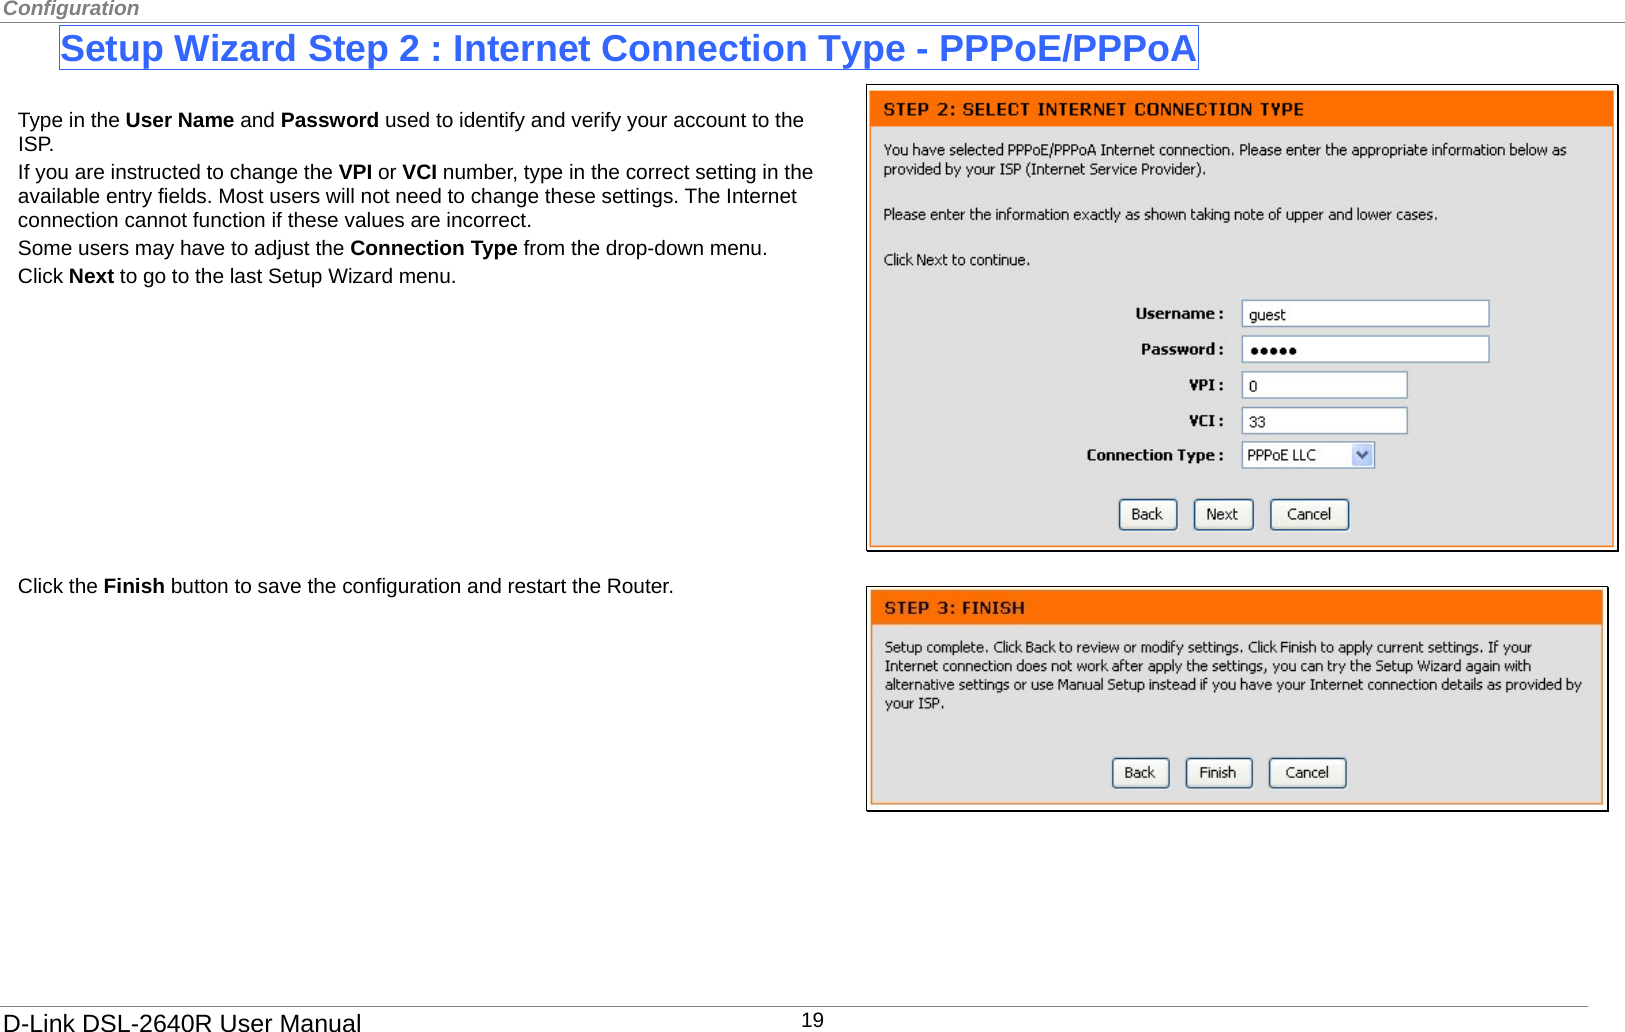 Configuration  Setup Wizard Step 2 : Internet Connection Type - PPPoE/PPPoA      Click the Finish button to save the configuration and restart the Router. Type in the User Name and Password used to identify and verify your account to the ISP.  If you are instructed to change the VPI or VCI number, type in the correct setting in the available entry fields. Most users will not need to change these settings. The Internet connection cannot function if these values are incorrect. Some users may have to adjust the Connection Type from the drop-down menu.   Click Next to go to the last Setup Wizard menu.           D-Link DSL-2640R User Manual 19